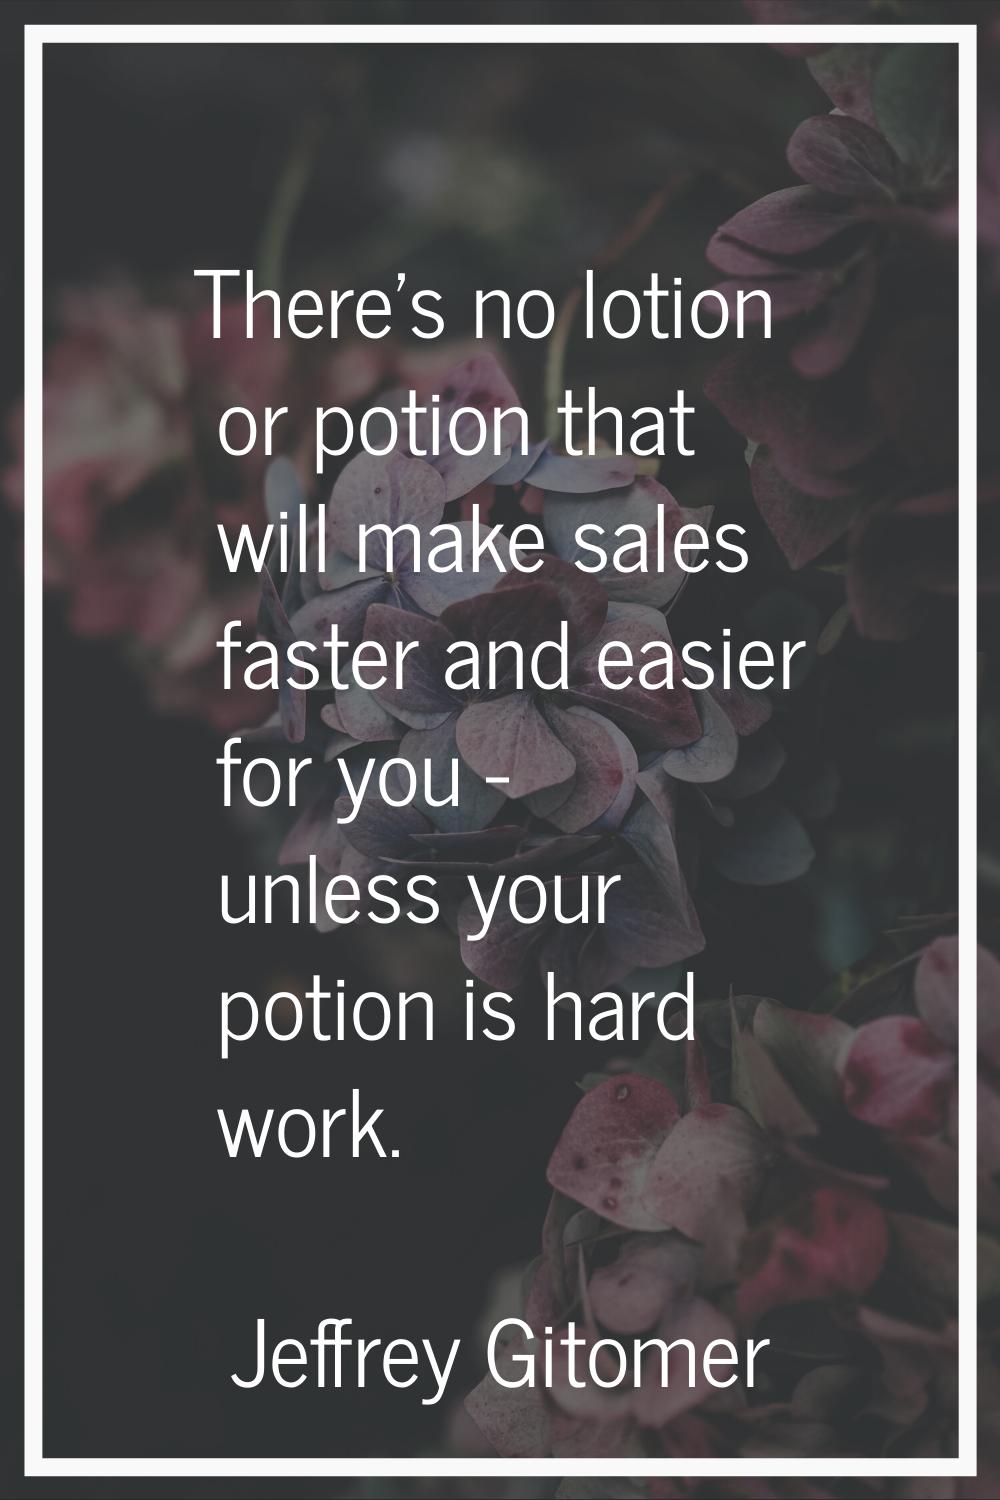 There's no lotion or potion that will make sales faster and easier for you - unless your potion is 